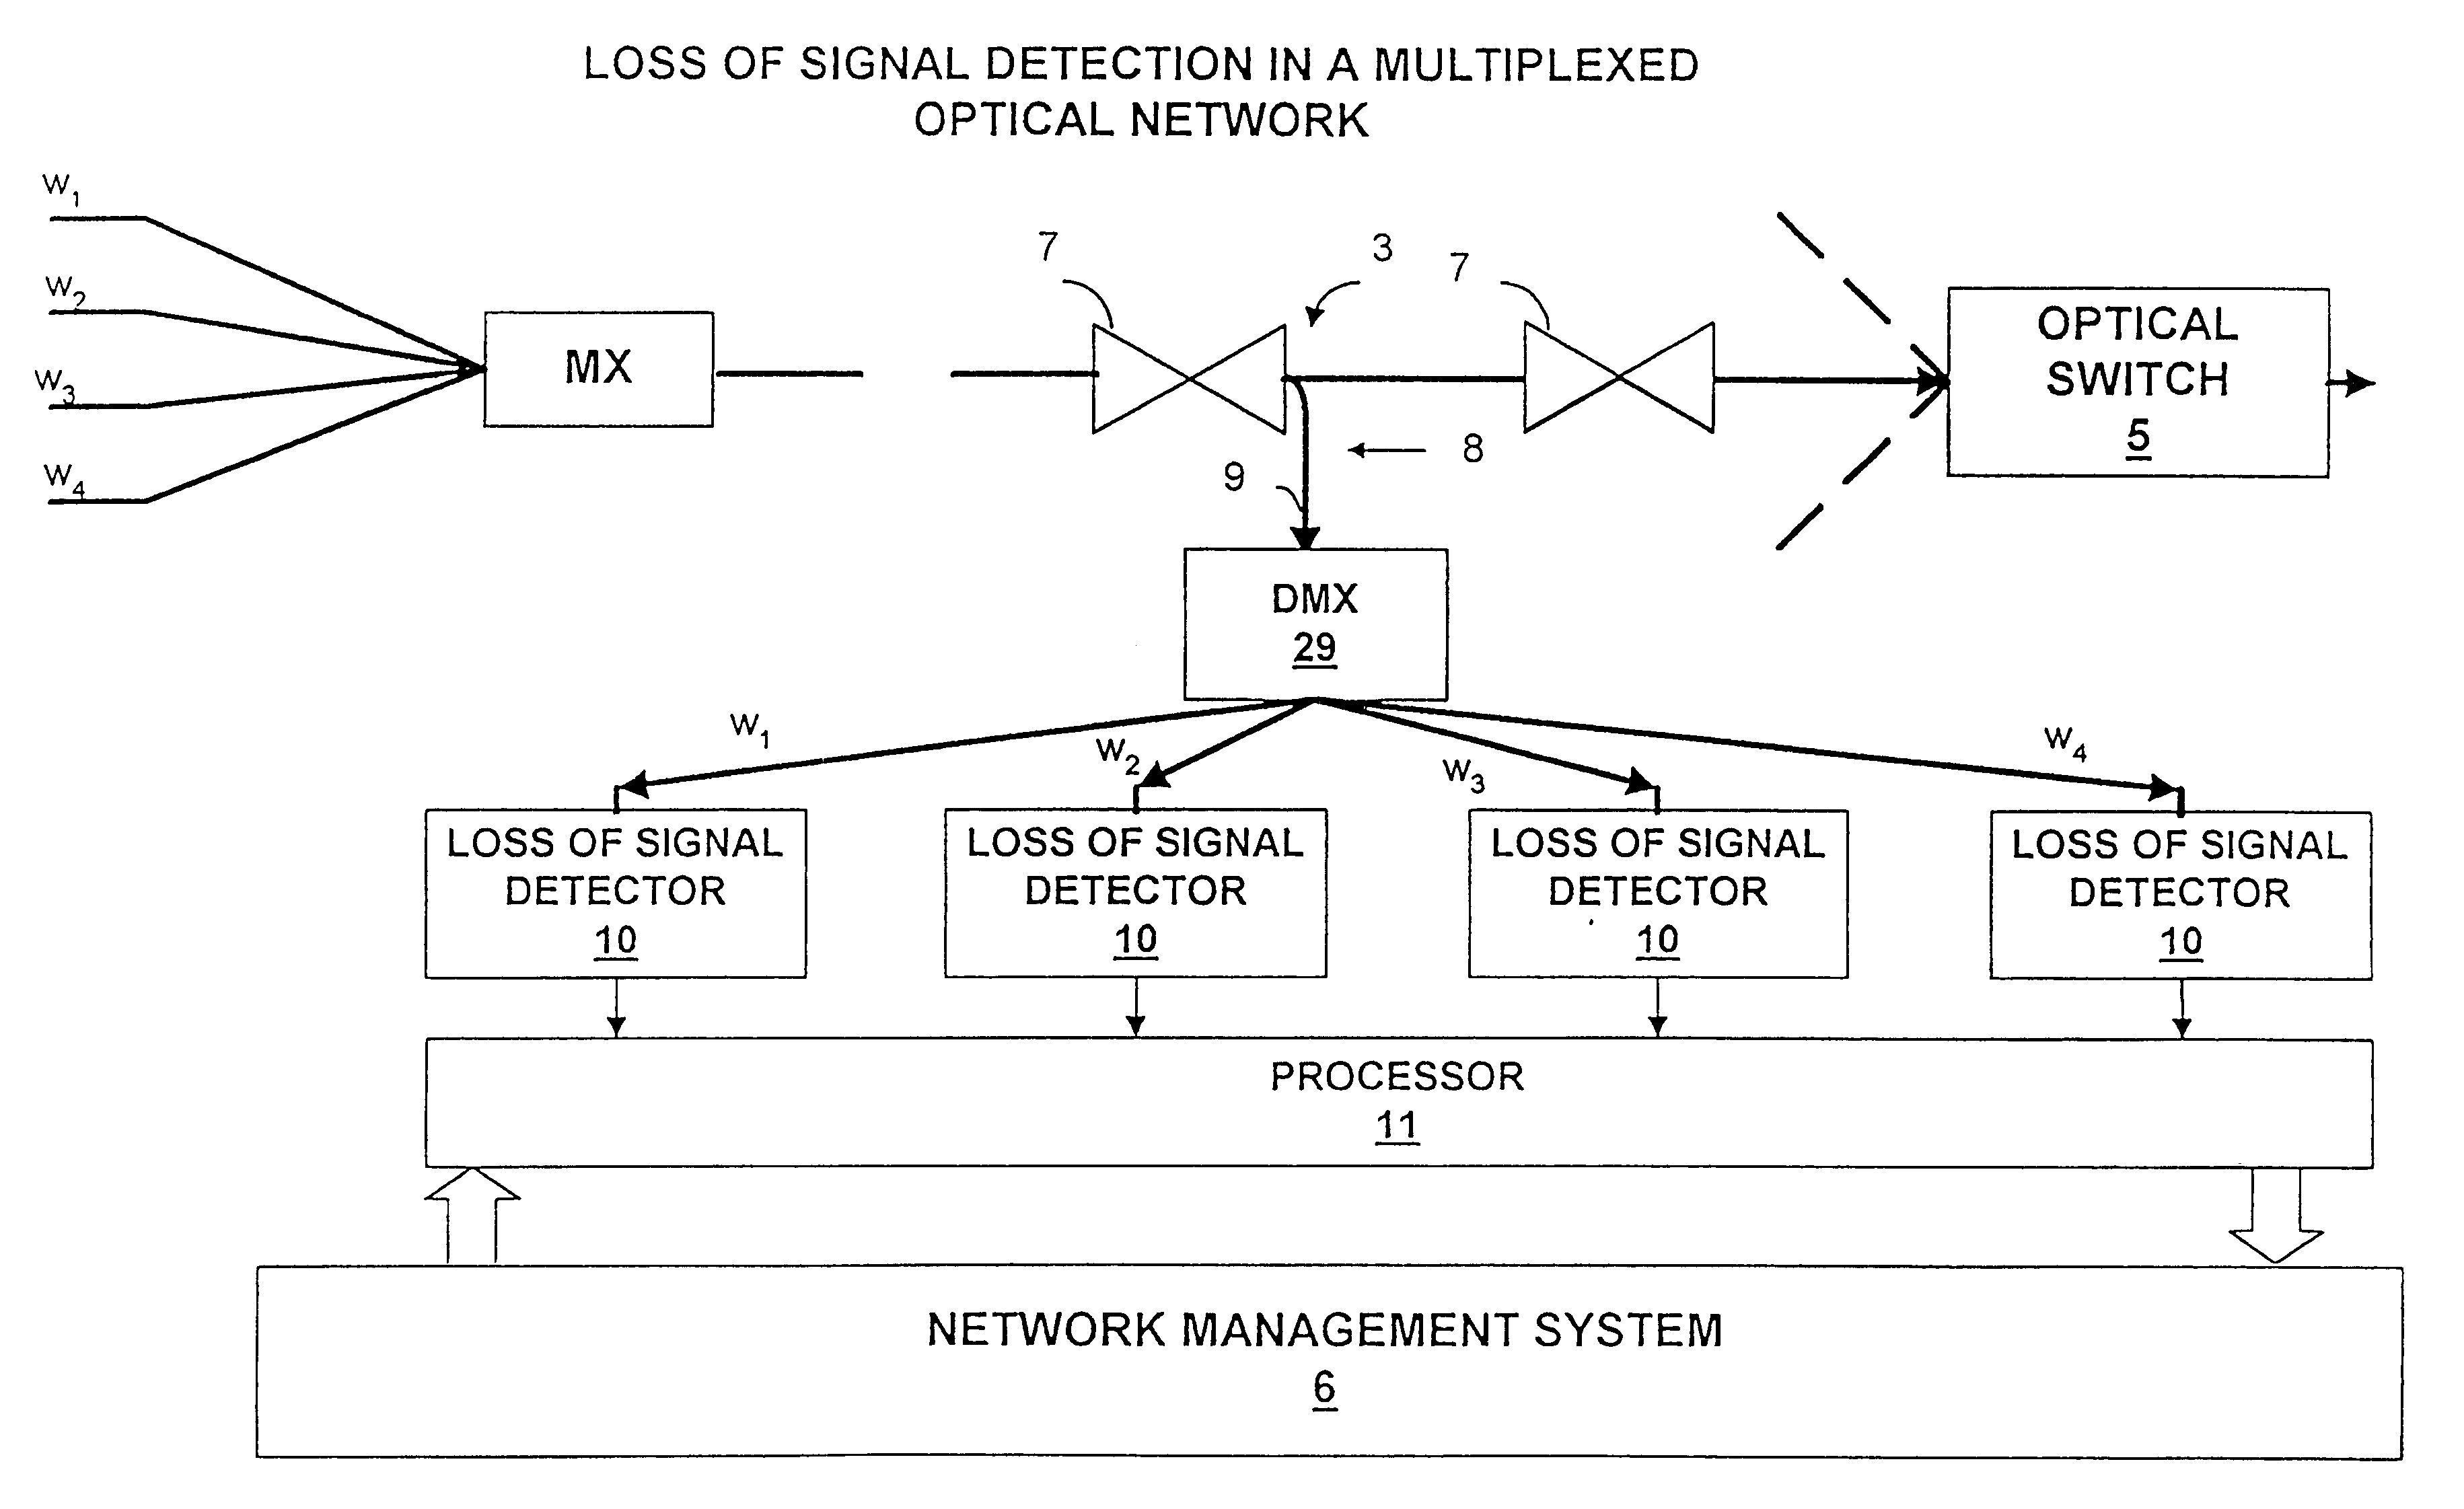 Optical network loss-of-signal detection